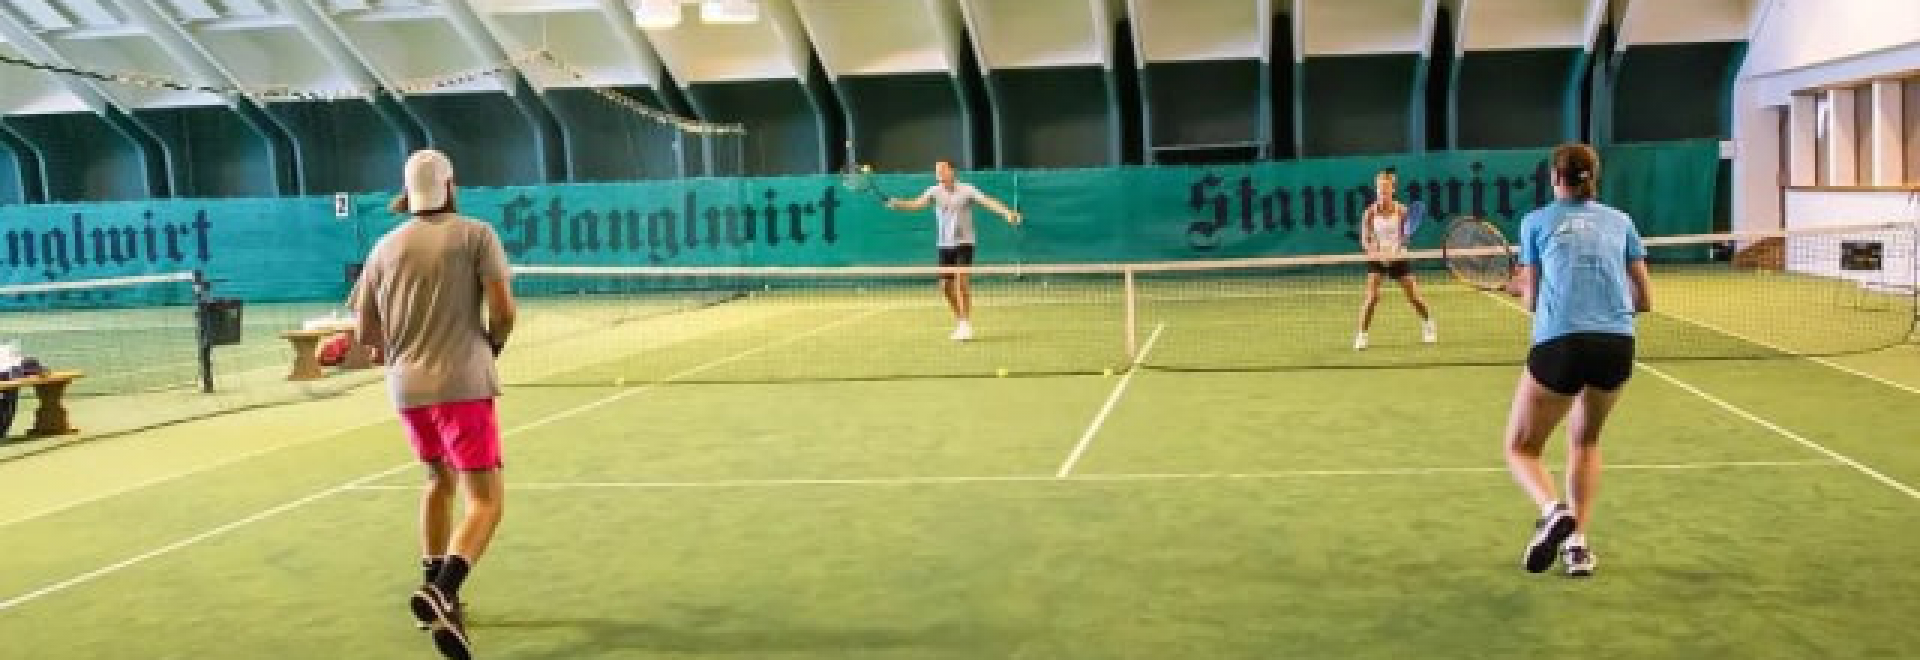 Tennis For Life - Bio Hotel Stanglwirt